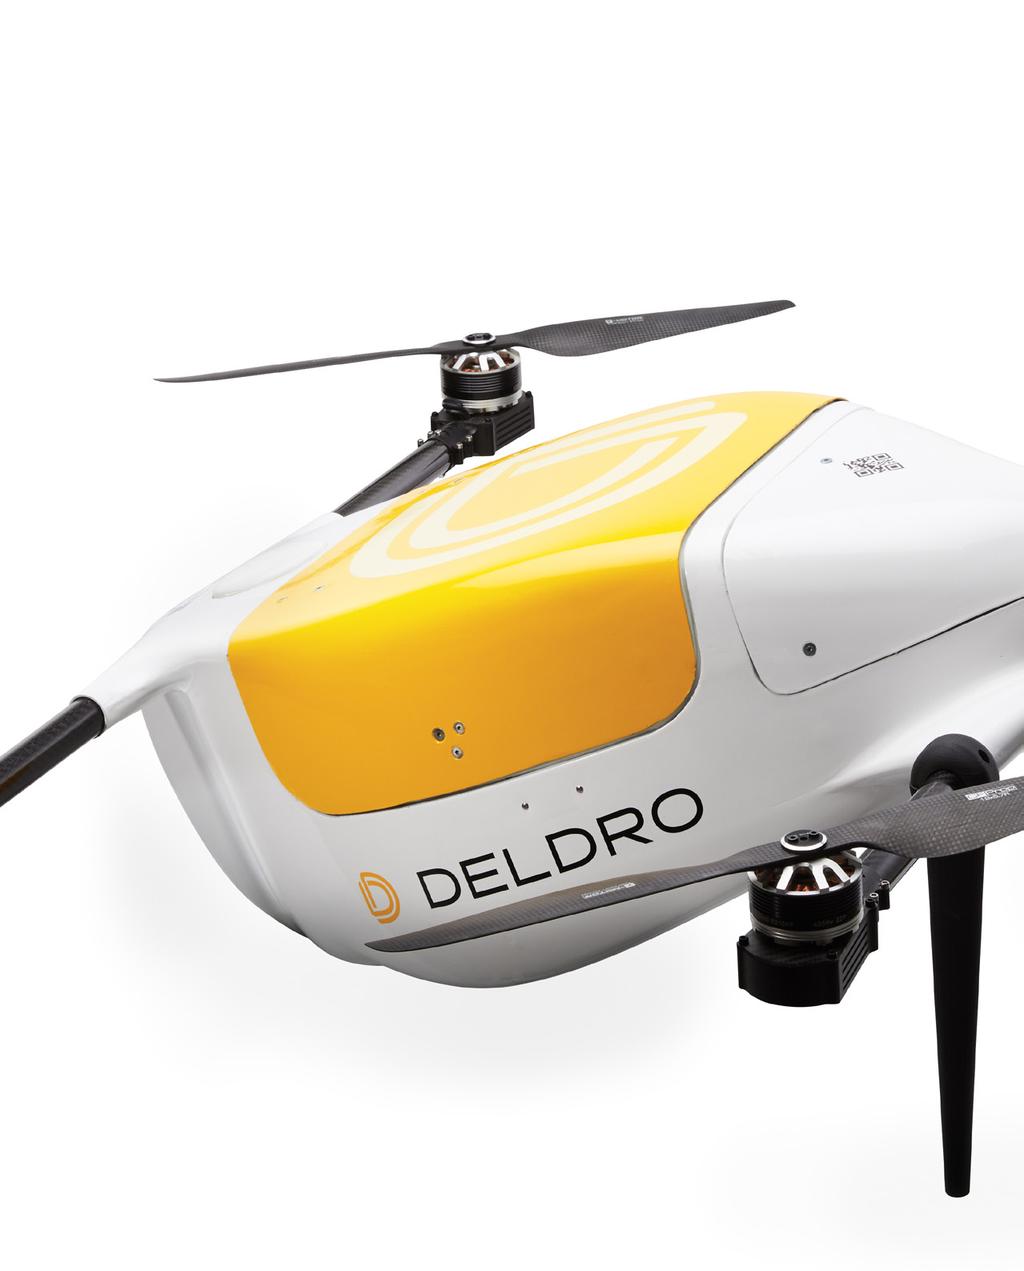 Delivery Drone How to prototype the future of transportation in a record short time?